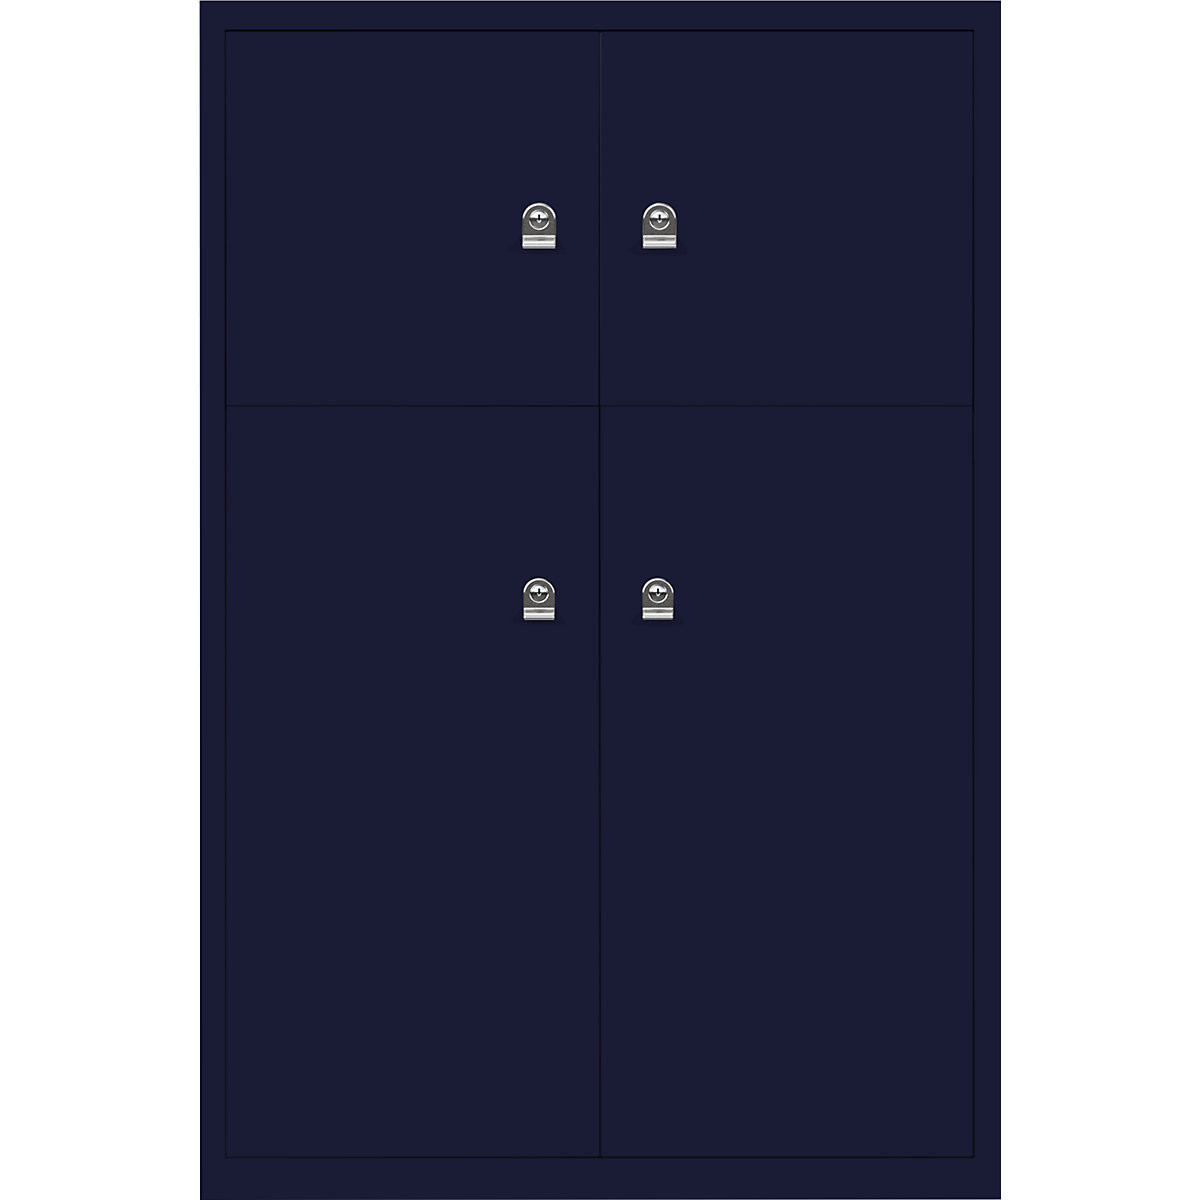 BISLEY – LateralFile™ lodge, with 4 lockable compartments, height 2 x 375 mm, 2 x 755 mm, oxford blue